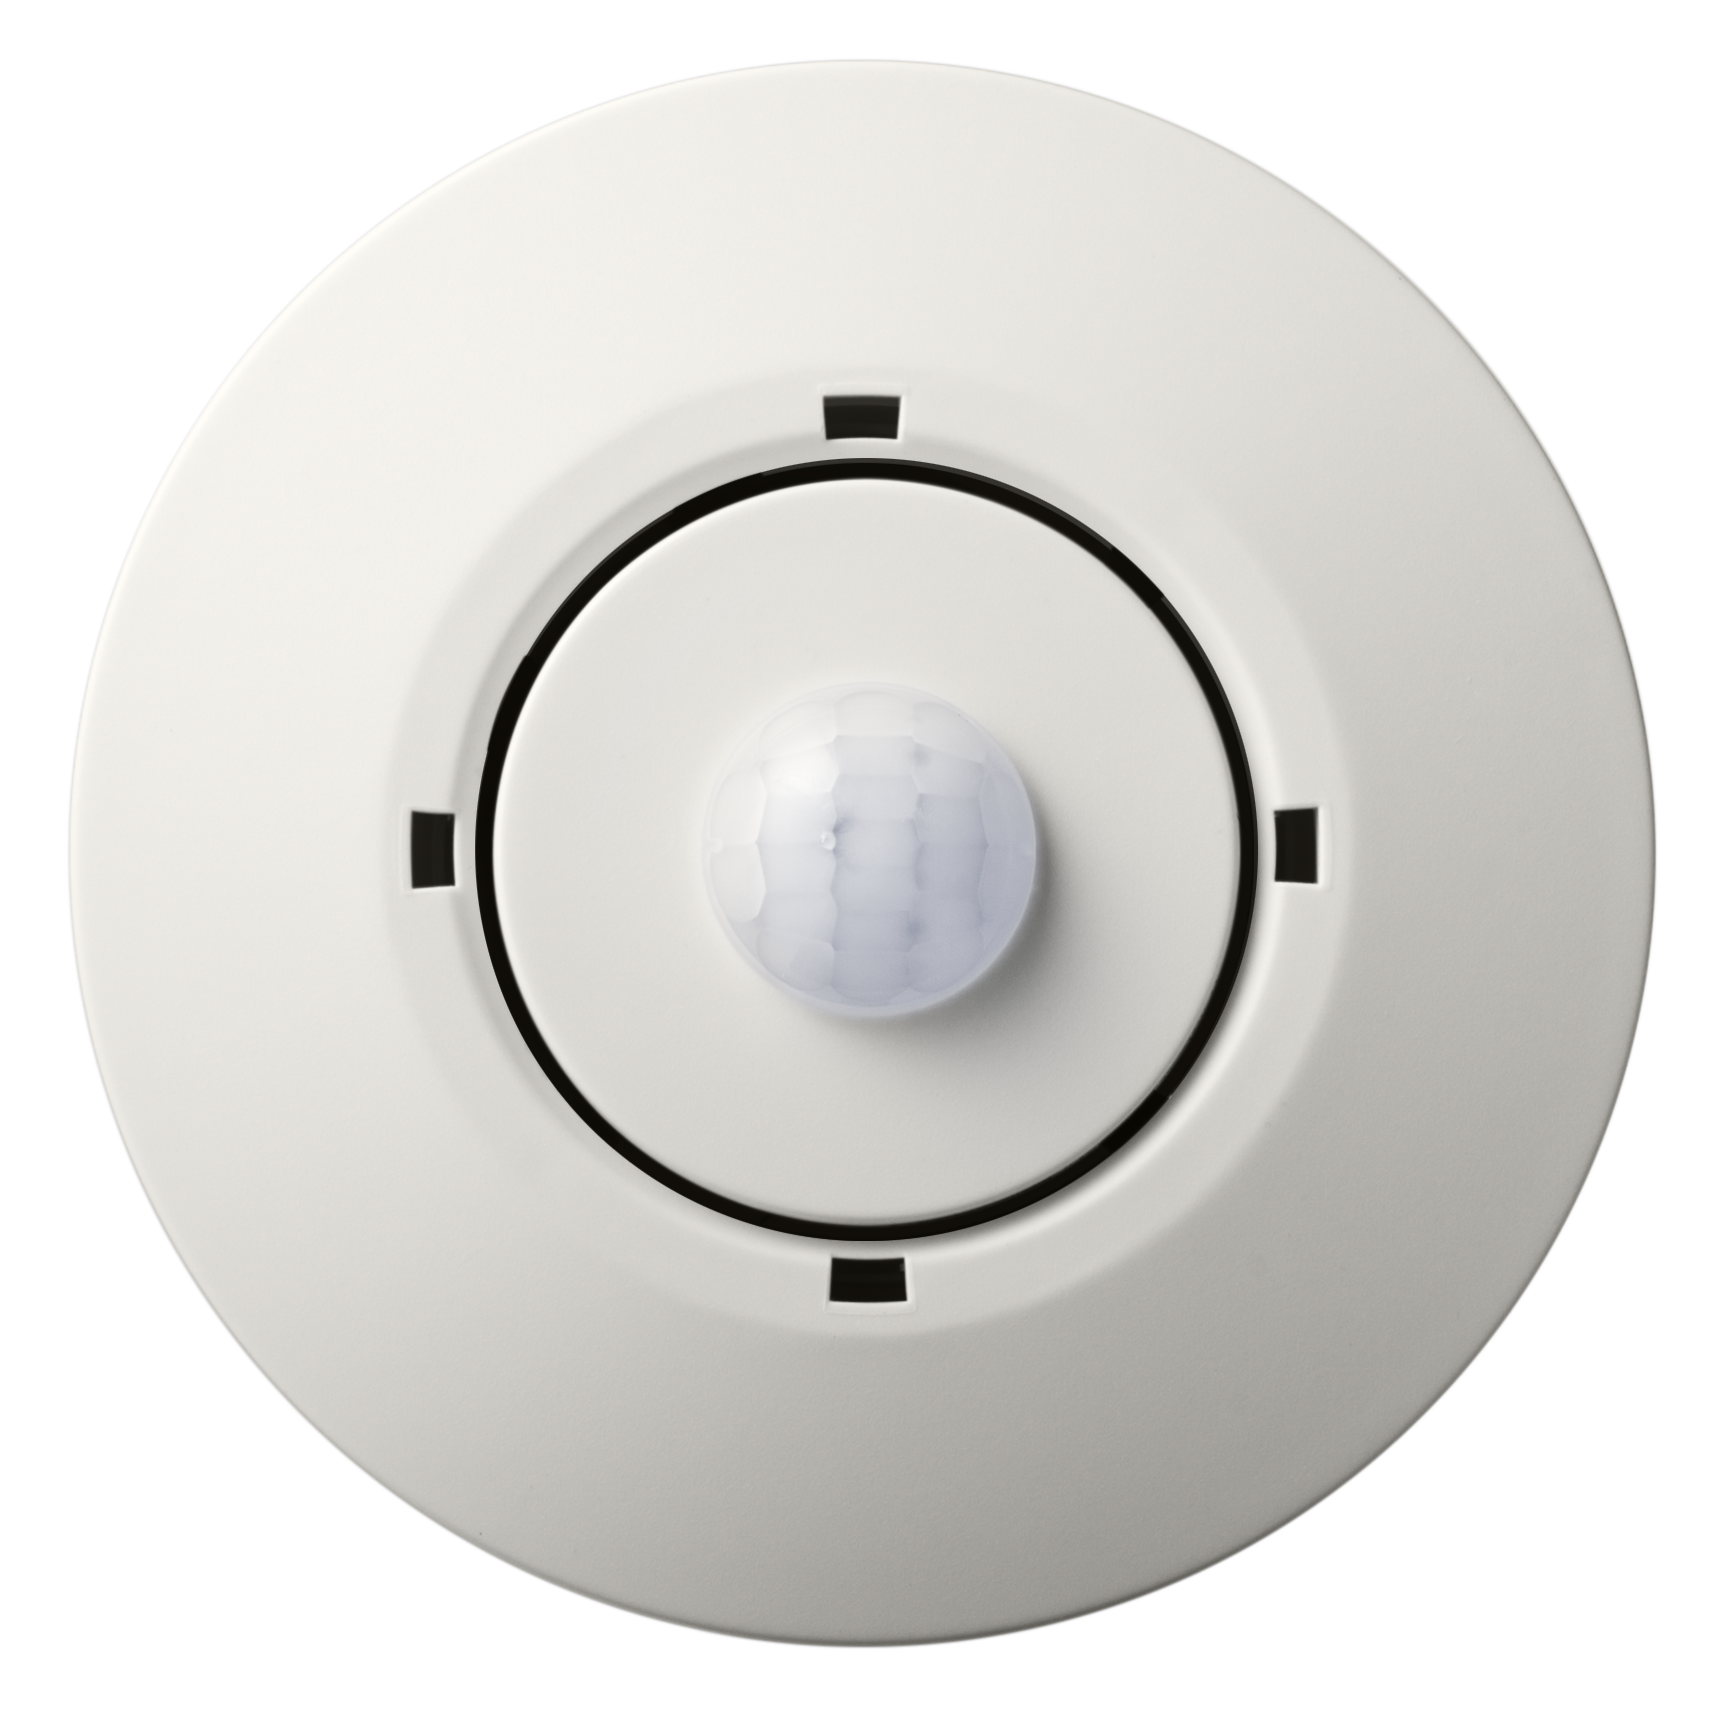 Lunatone DALI-2 motion sensor 12m, constant light control, Application Controller and Instance Mode, RAL9010, standard mounting holes - 86458670